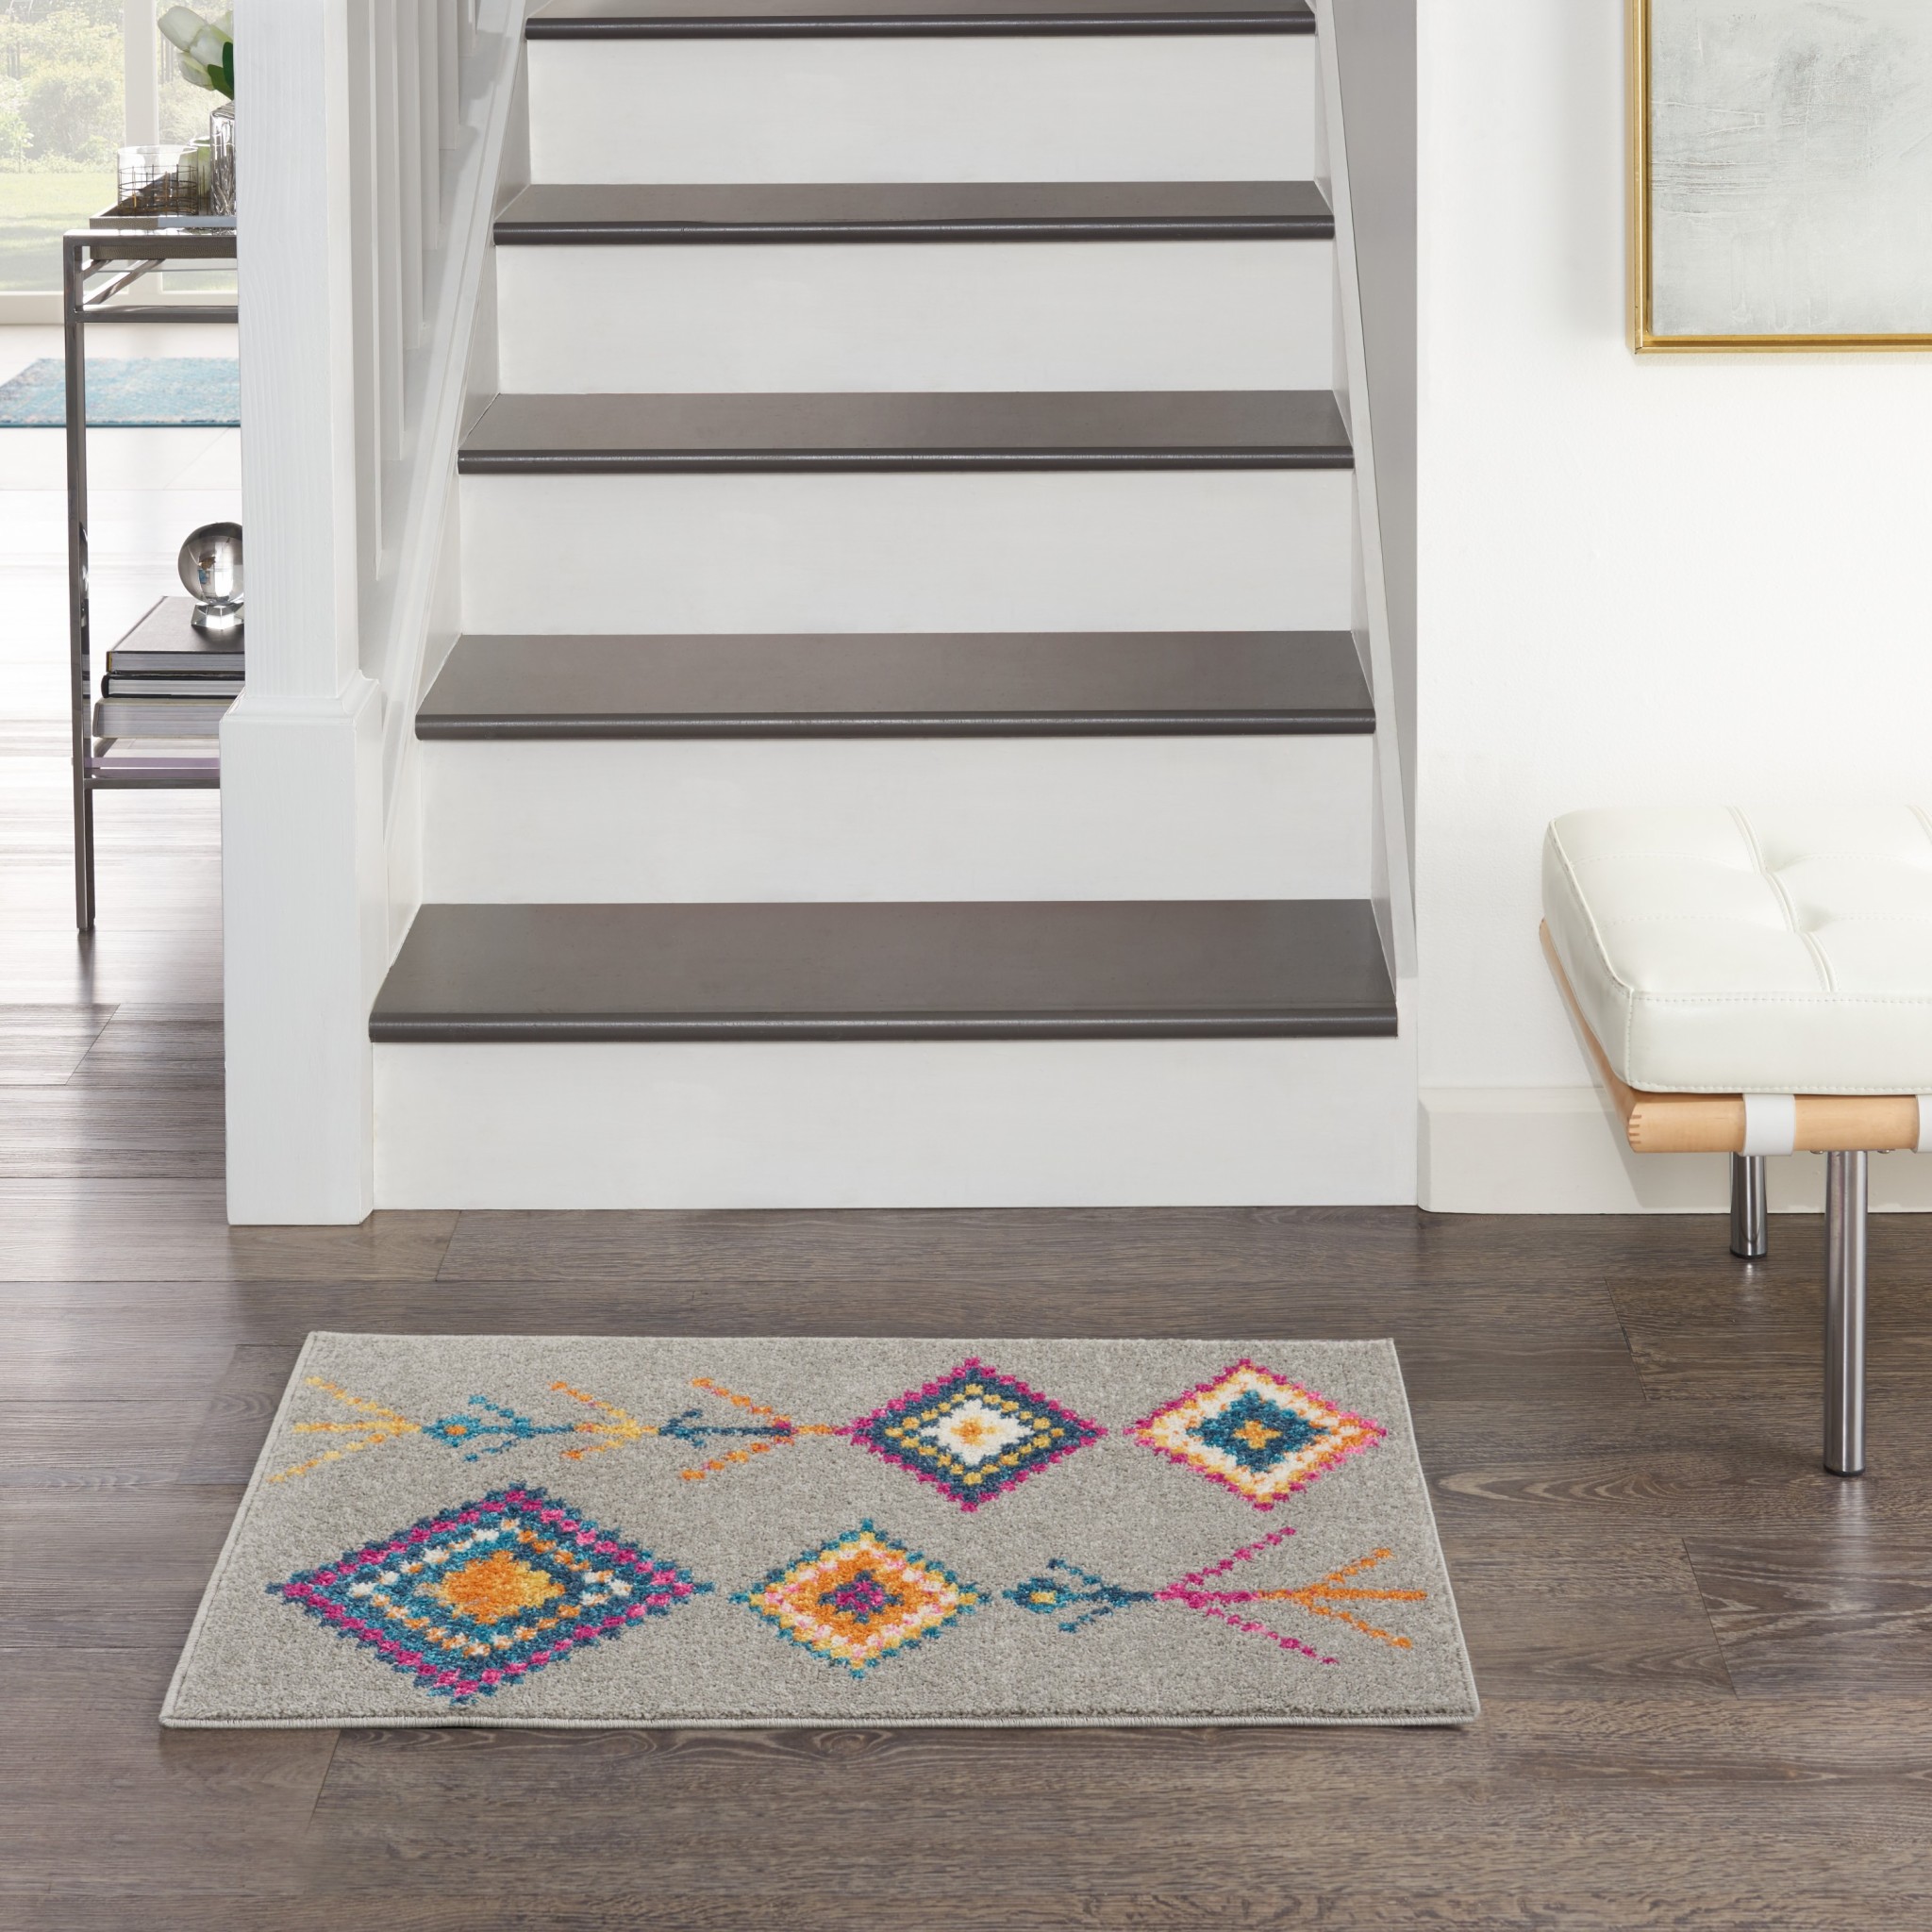 2 x 3 Gray and Multicolor Geometric Scatter Rug